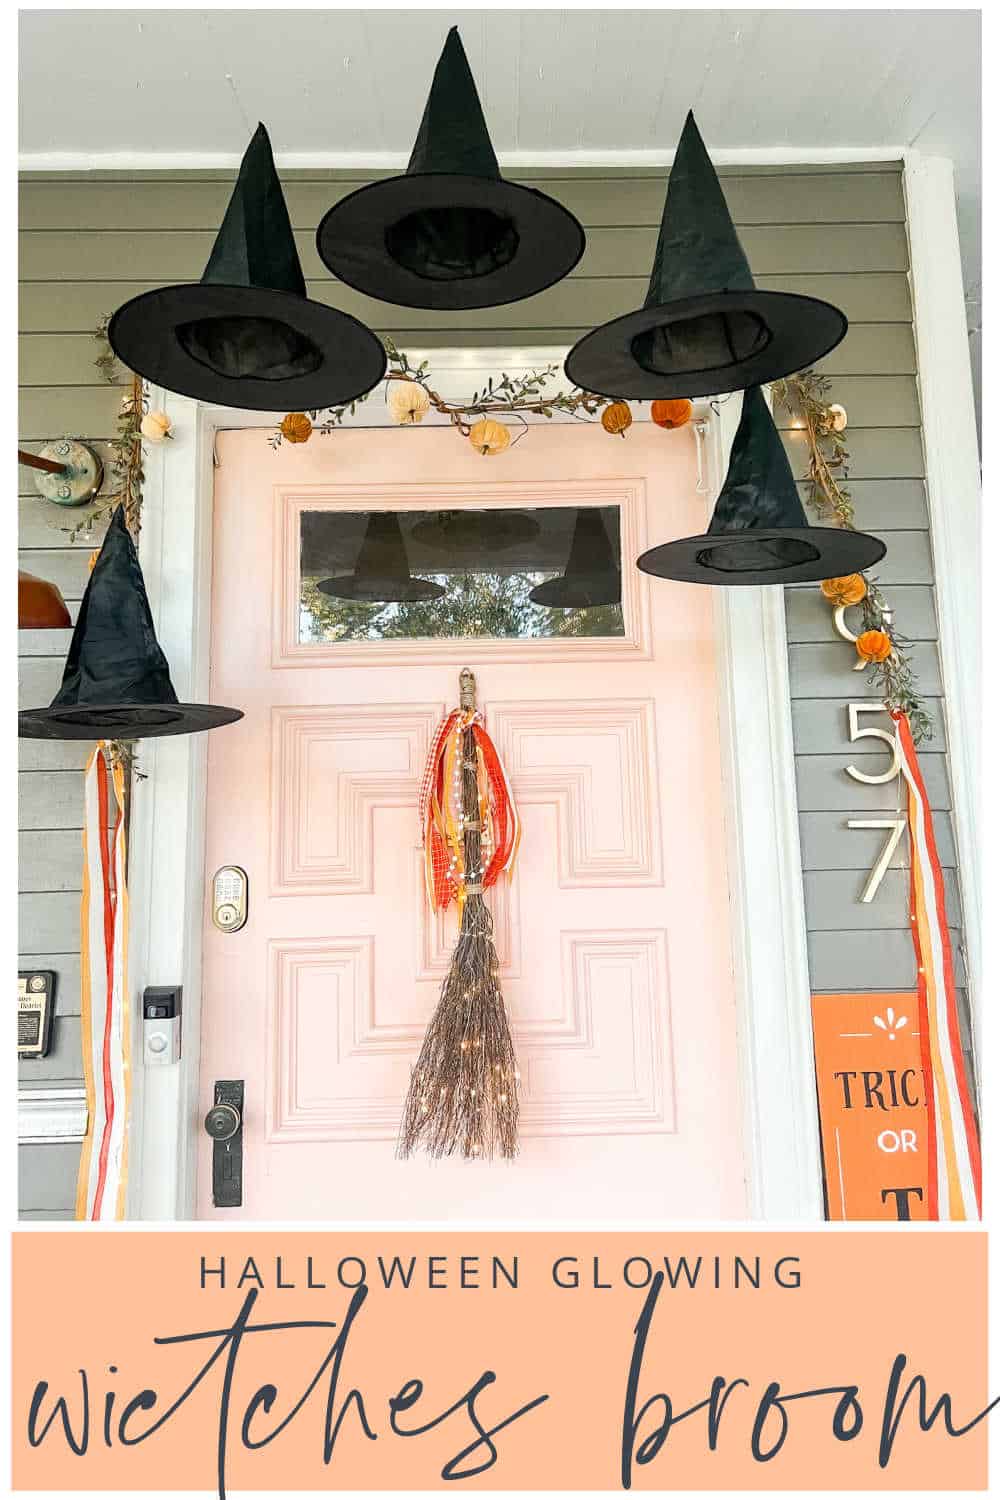 Cast a welcoming spell on visitors this Halloween by creating a delightful witch porch. A glowing witches broom is a whimsical wreath alternative. Battery operated shimmering lights will light the way for guests. This is a hack on the Pottery Barn version for a fraction of the price!